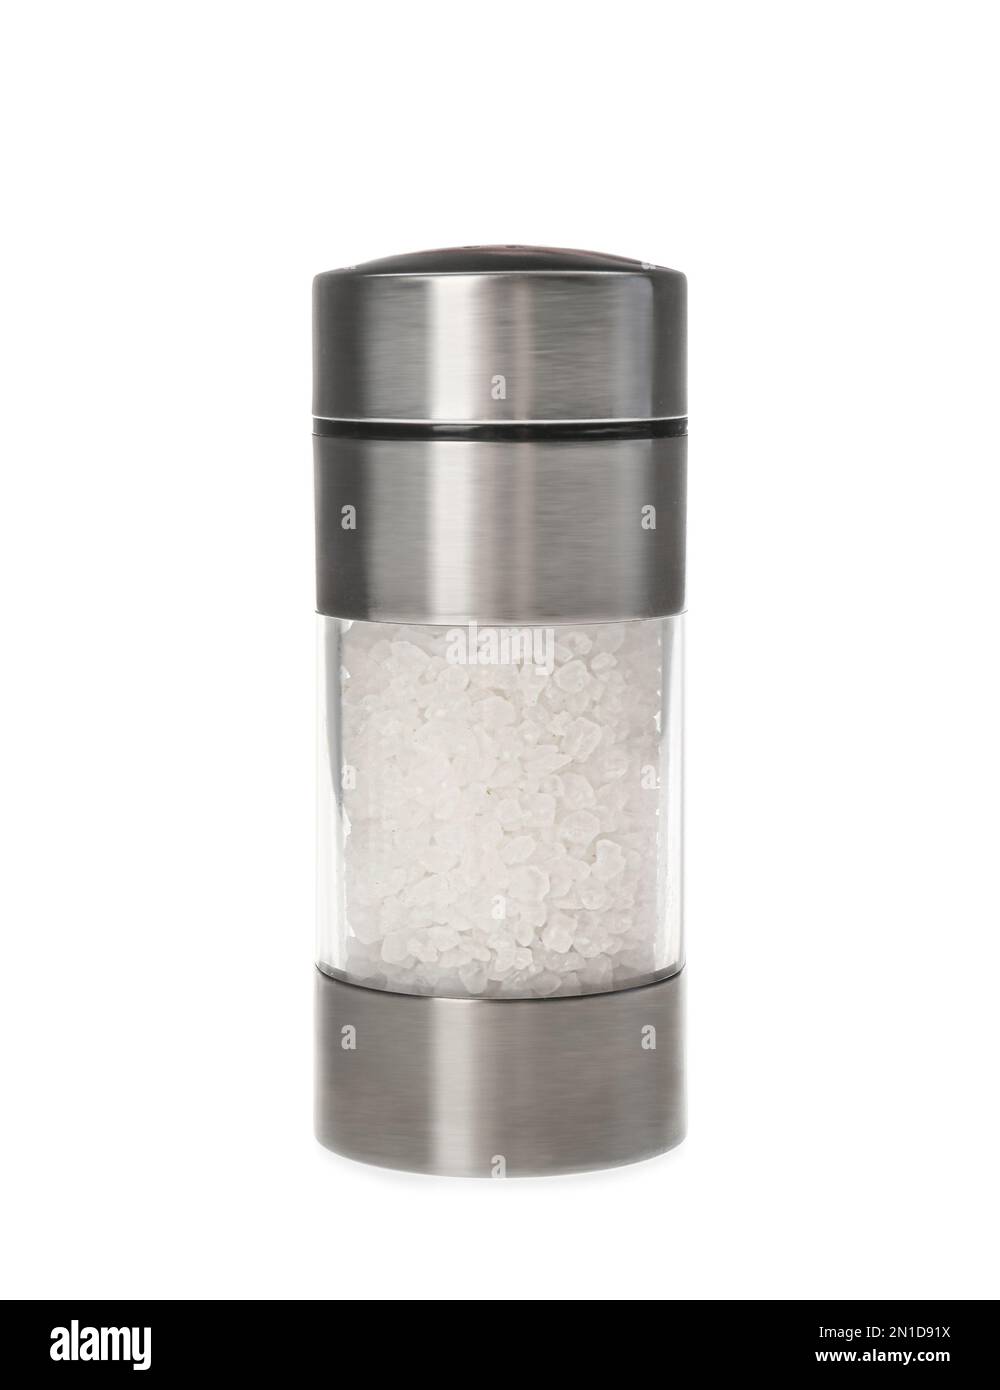 https://c8.alamy.com/comp/2N1D91X/shaker-with-natural-salt-isolated-on-white-2N1D91X.jpg